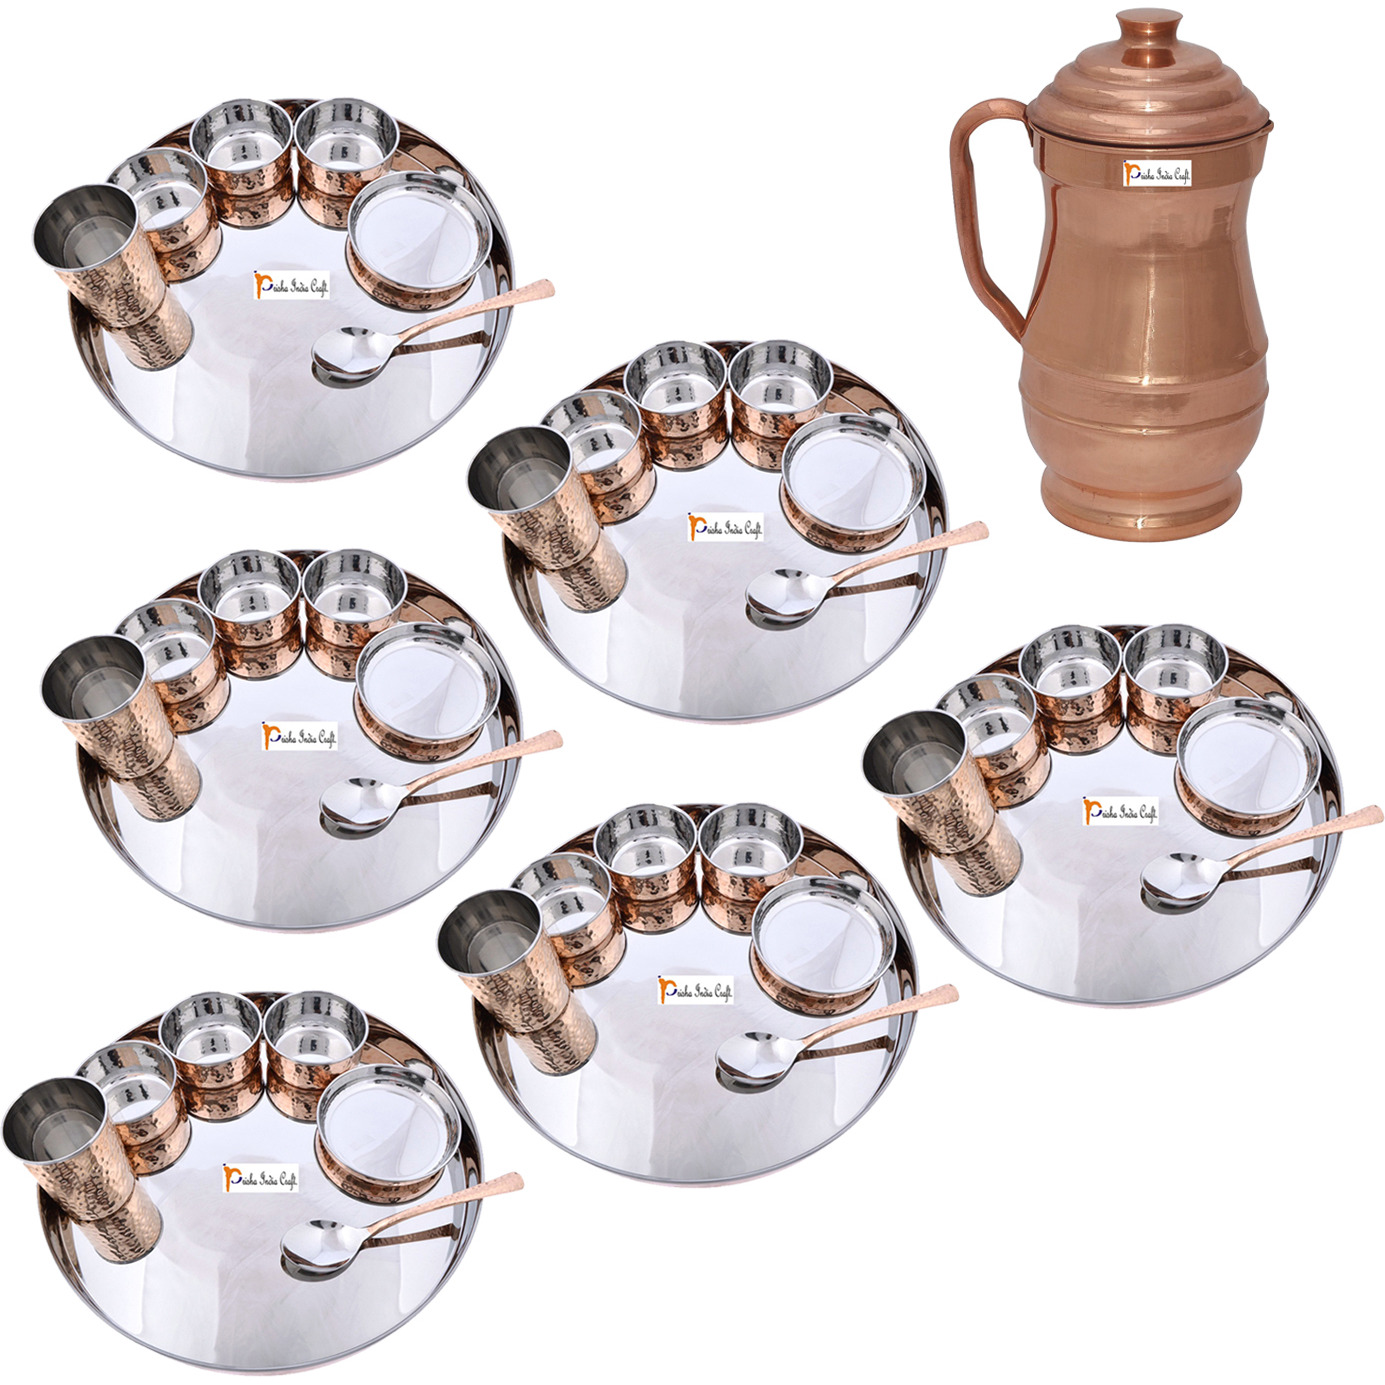 Prisha India Craft B. Set of 6 Dinnerware Traditional Stainless Steel Copper Dinner Set of Thali Plate, Bowls, Glass and Spoon, Dia 13  With 1 Pure Copper Maharaja Pitcher Jug - Christmas Gift